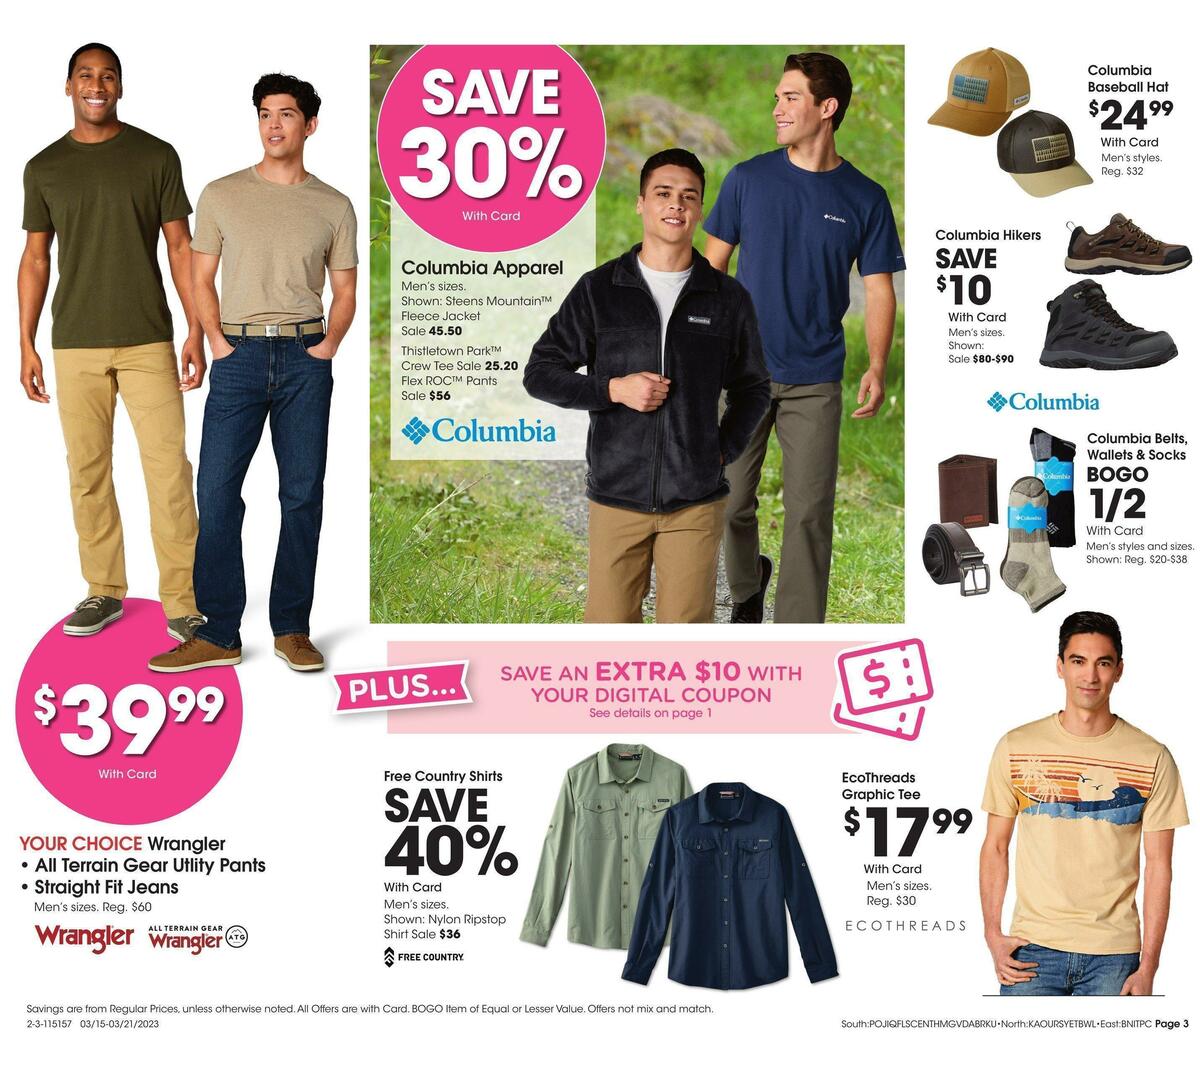 Fred Meyer General Merchandise Weekly Ad from March 15